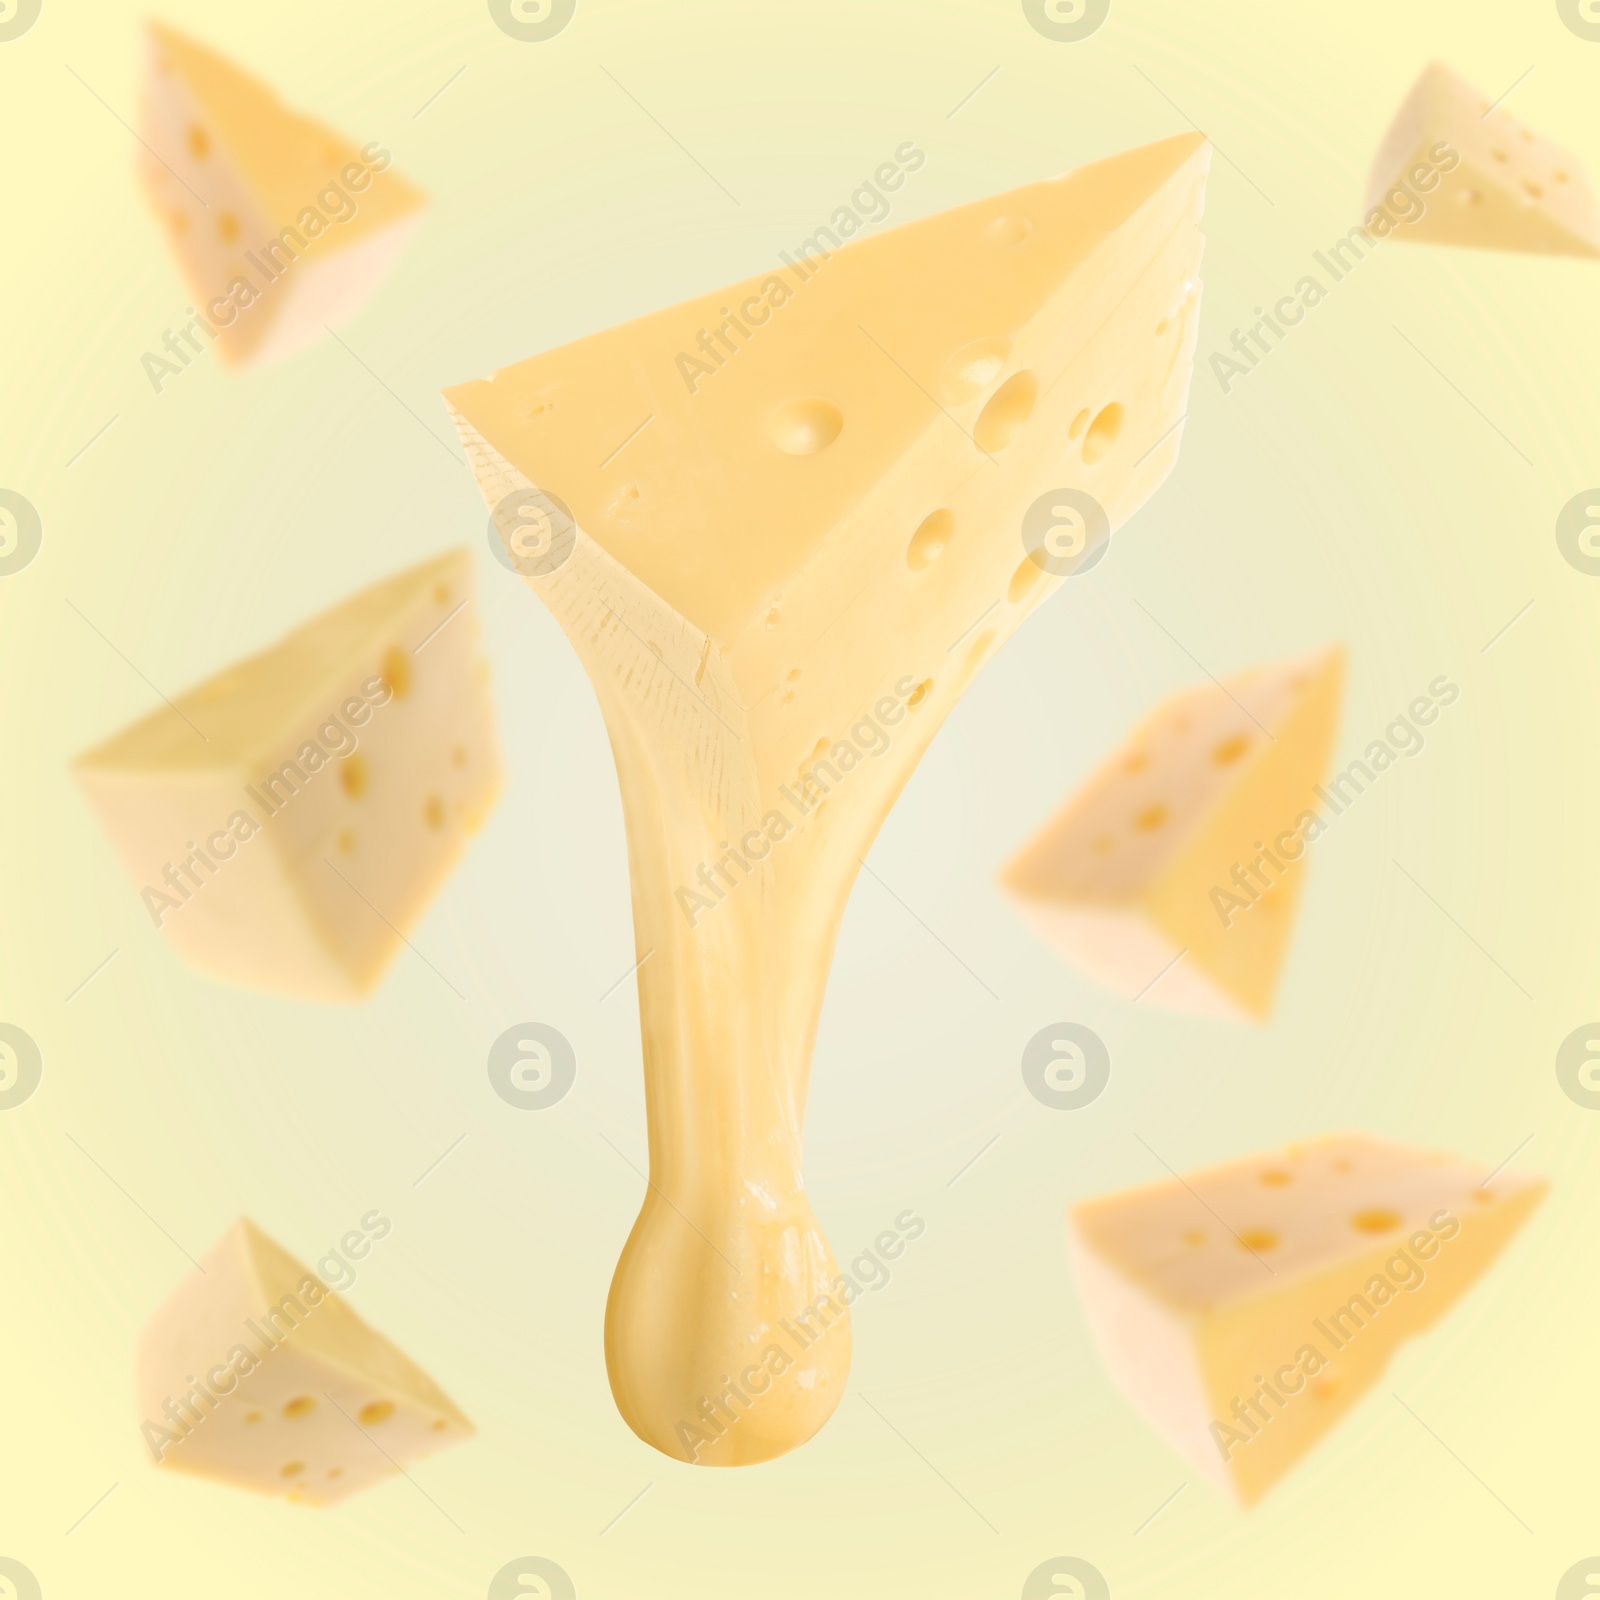 Image of Pieces of cheese falling on yellow background